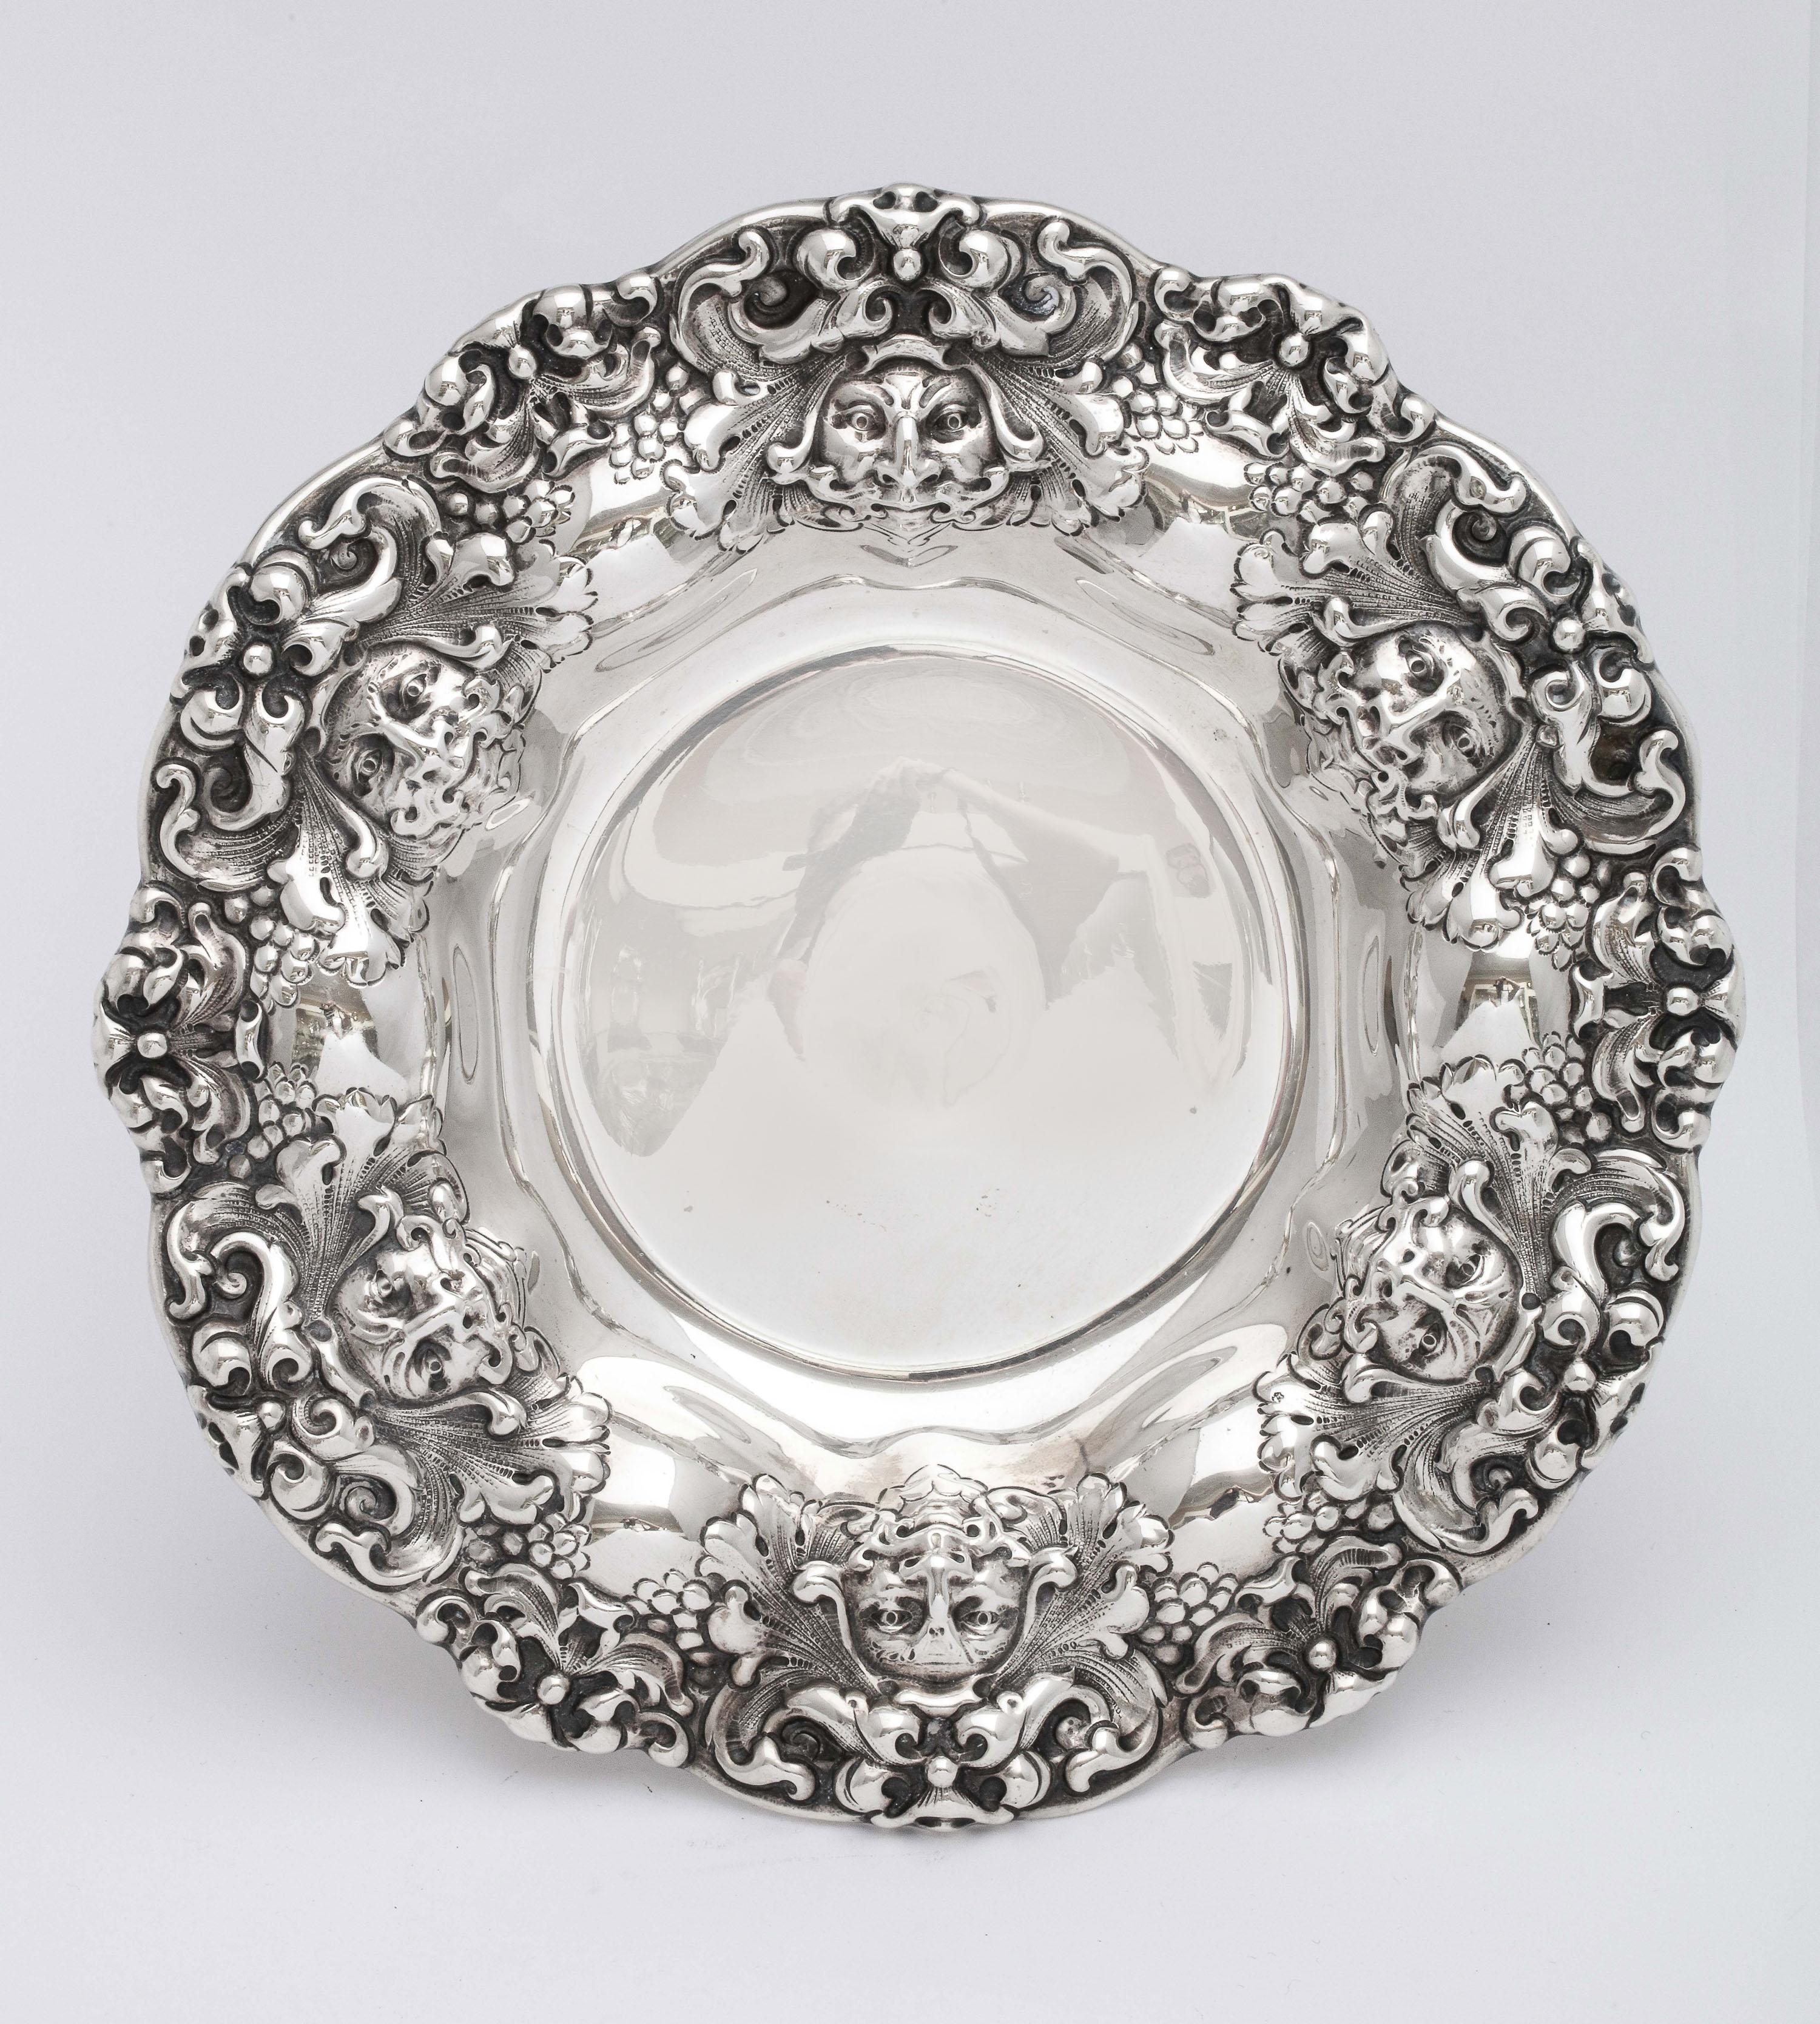 Neoclassical Style, Victorian Period Sterling Silver Tazza by Gorham In Good Condition For Sale In New York, NY